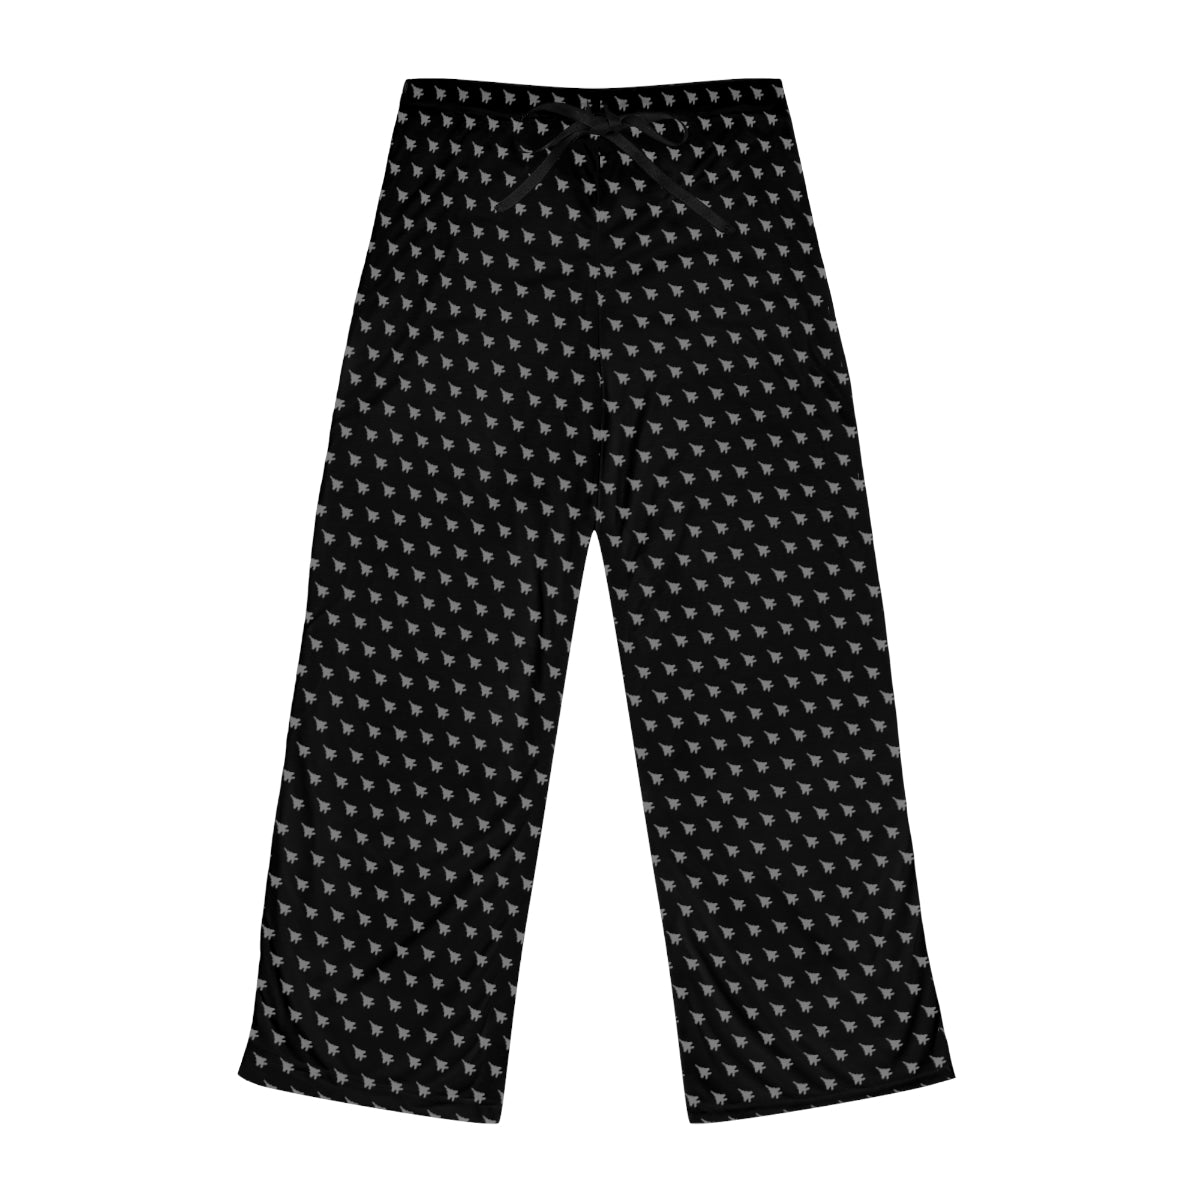 Women's Cropped Pants - Gingham Black White – S & F Online Store